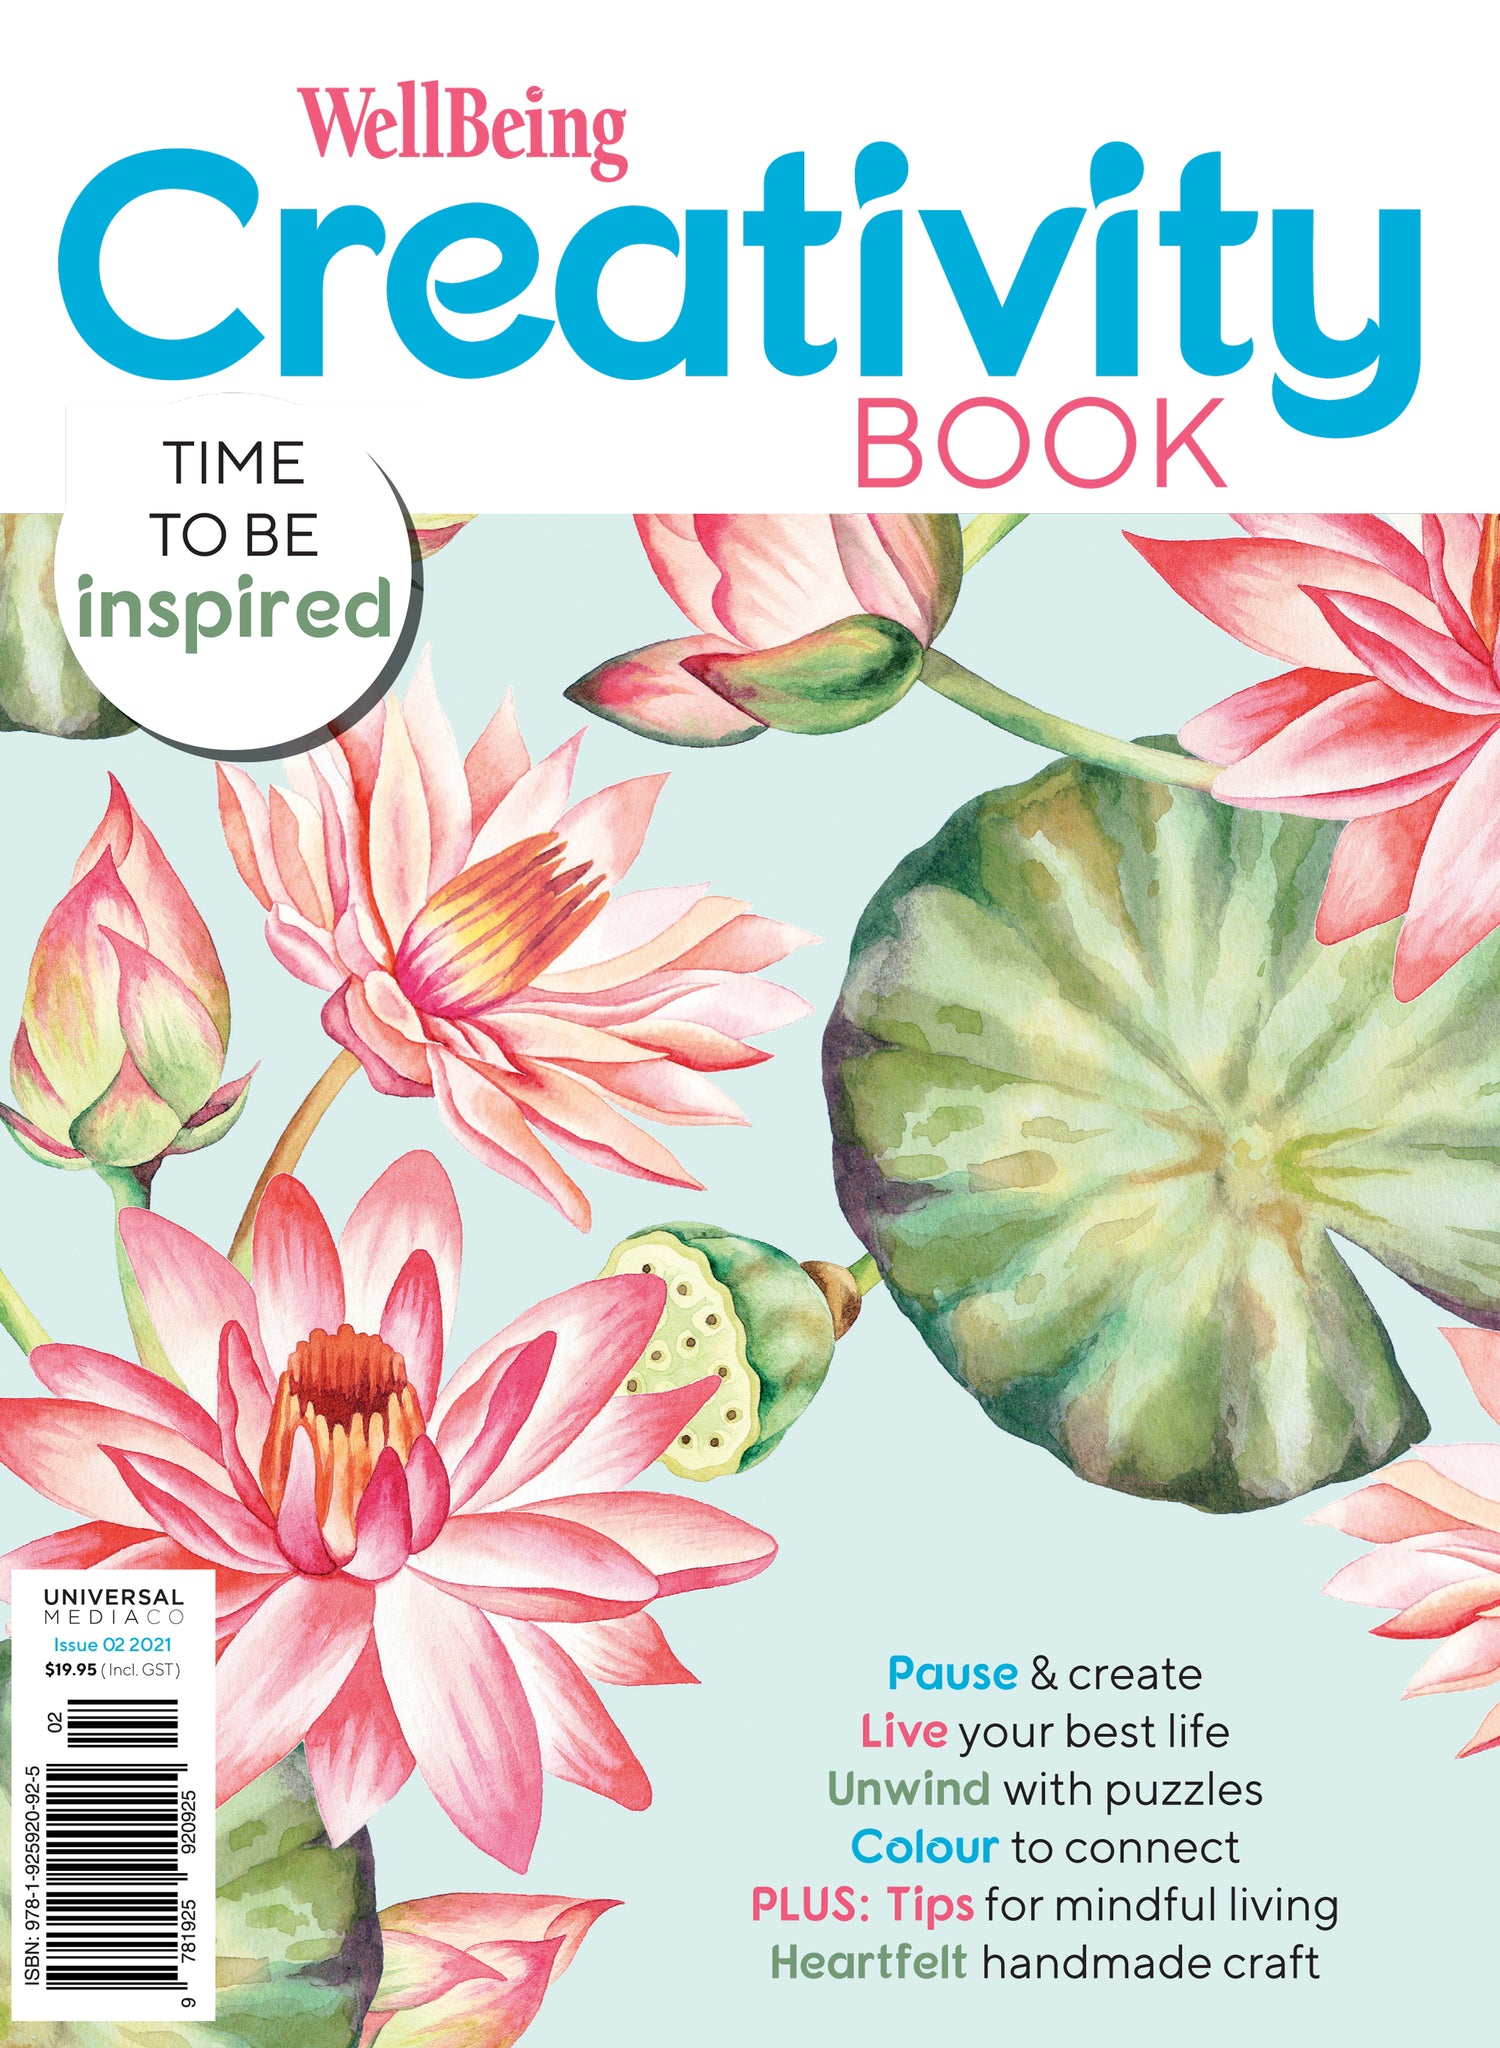 WellBeing Creativity Book 2 Cover